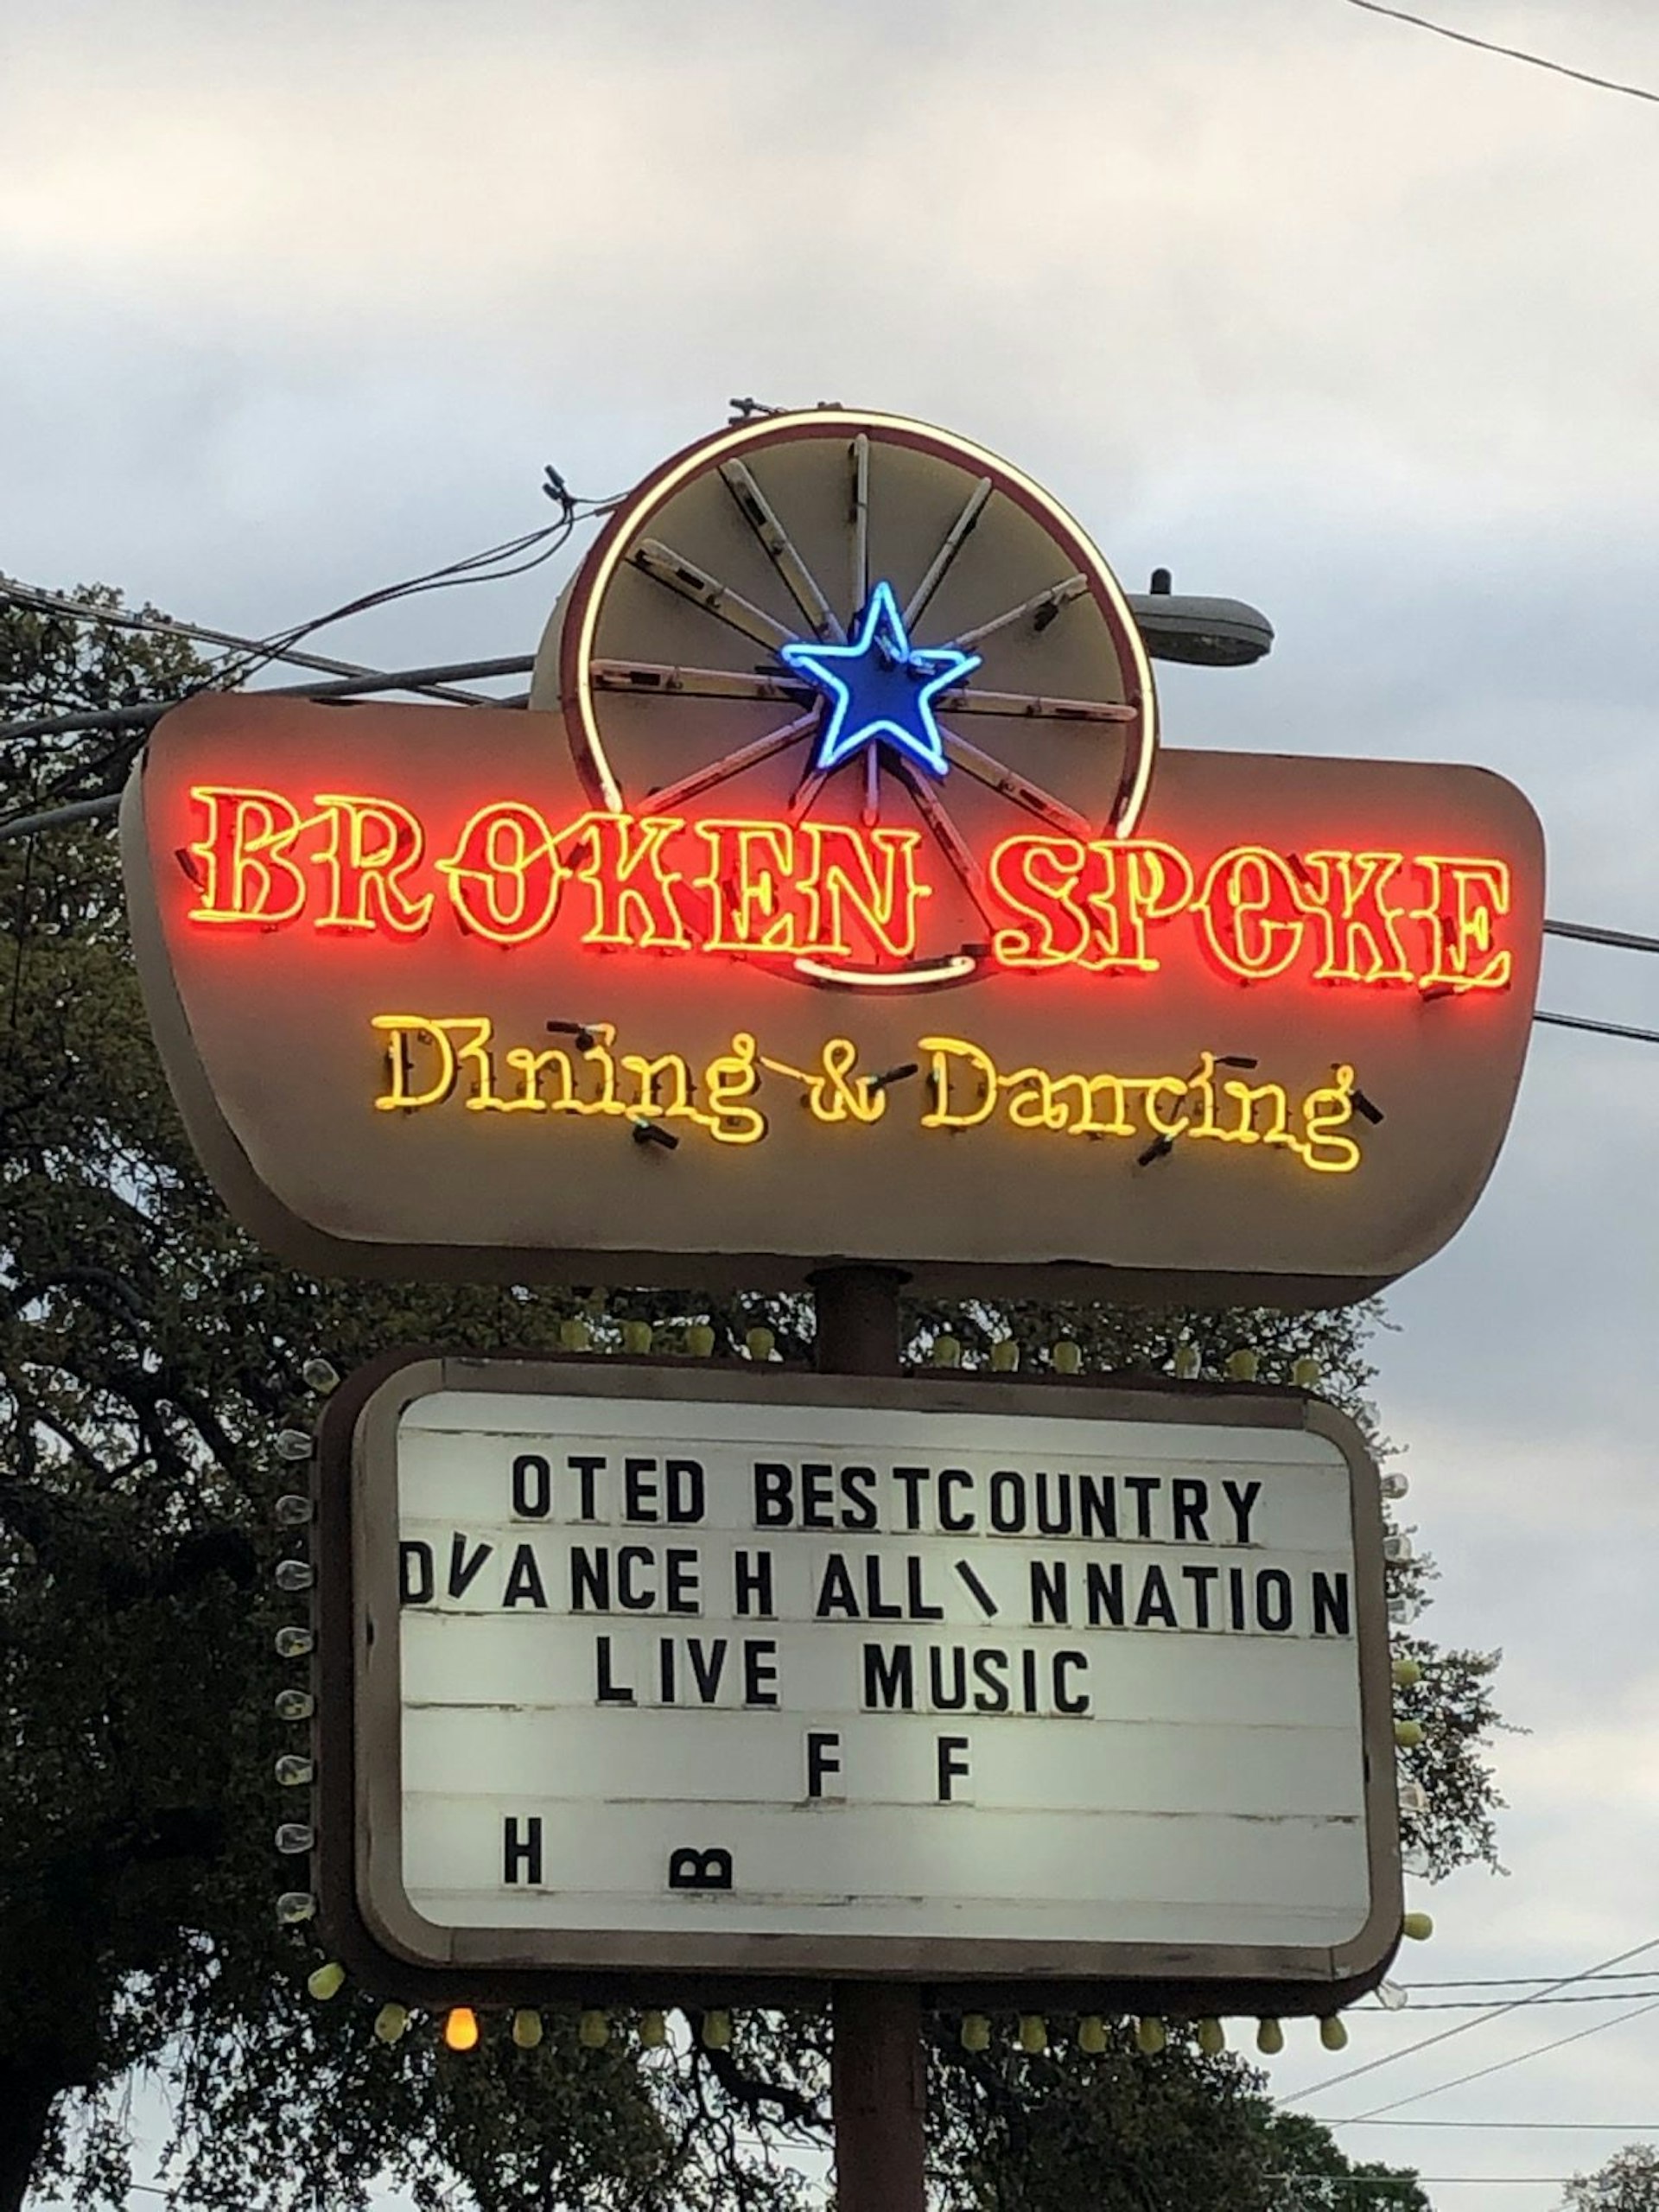 An old-fashioned neon sign and marquee with very crooked letters in the Hill Country says this was voted best country dance hall in the nation